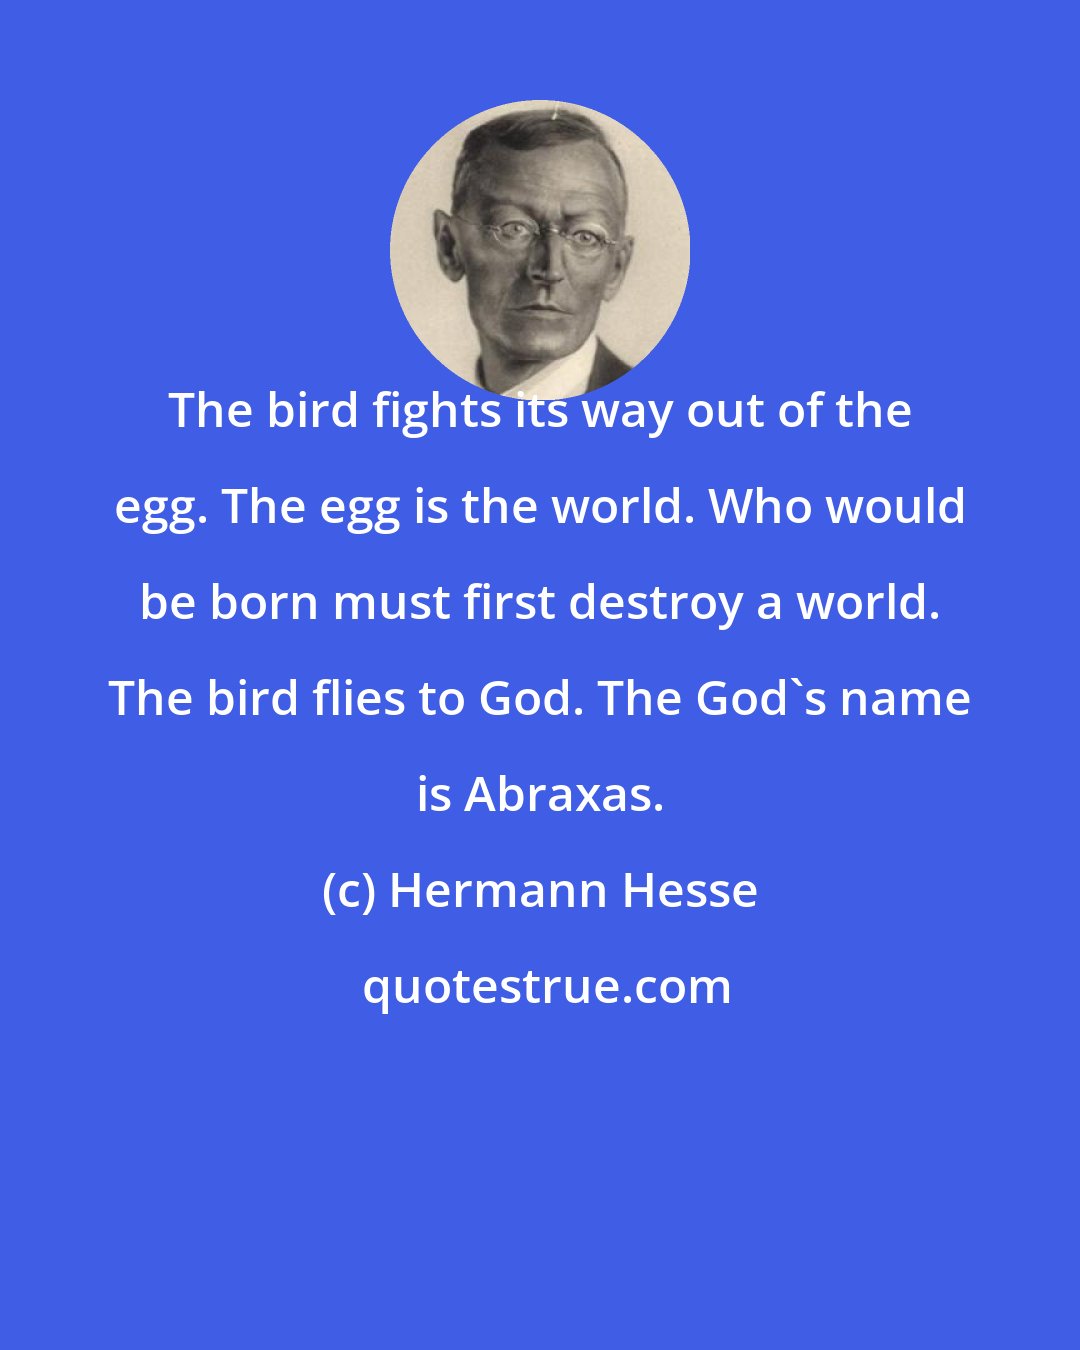 Hermann Hesse: The bird fights its way out of the egg. The egg is the world. Who would be born must first destroy a world. The bird flies to God. The God's name is Abraxas.